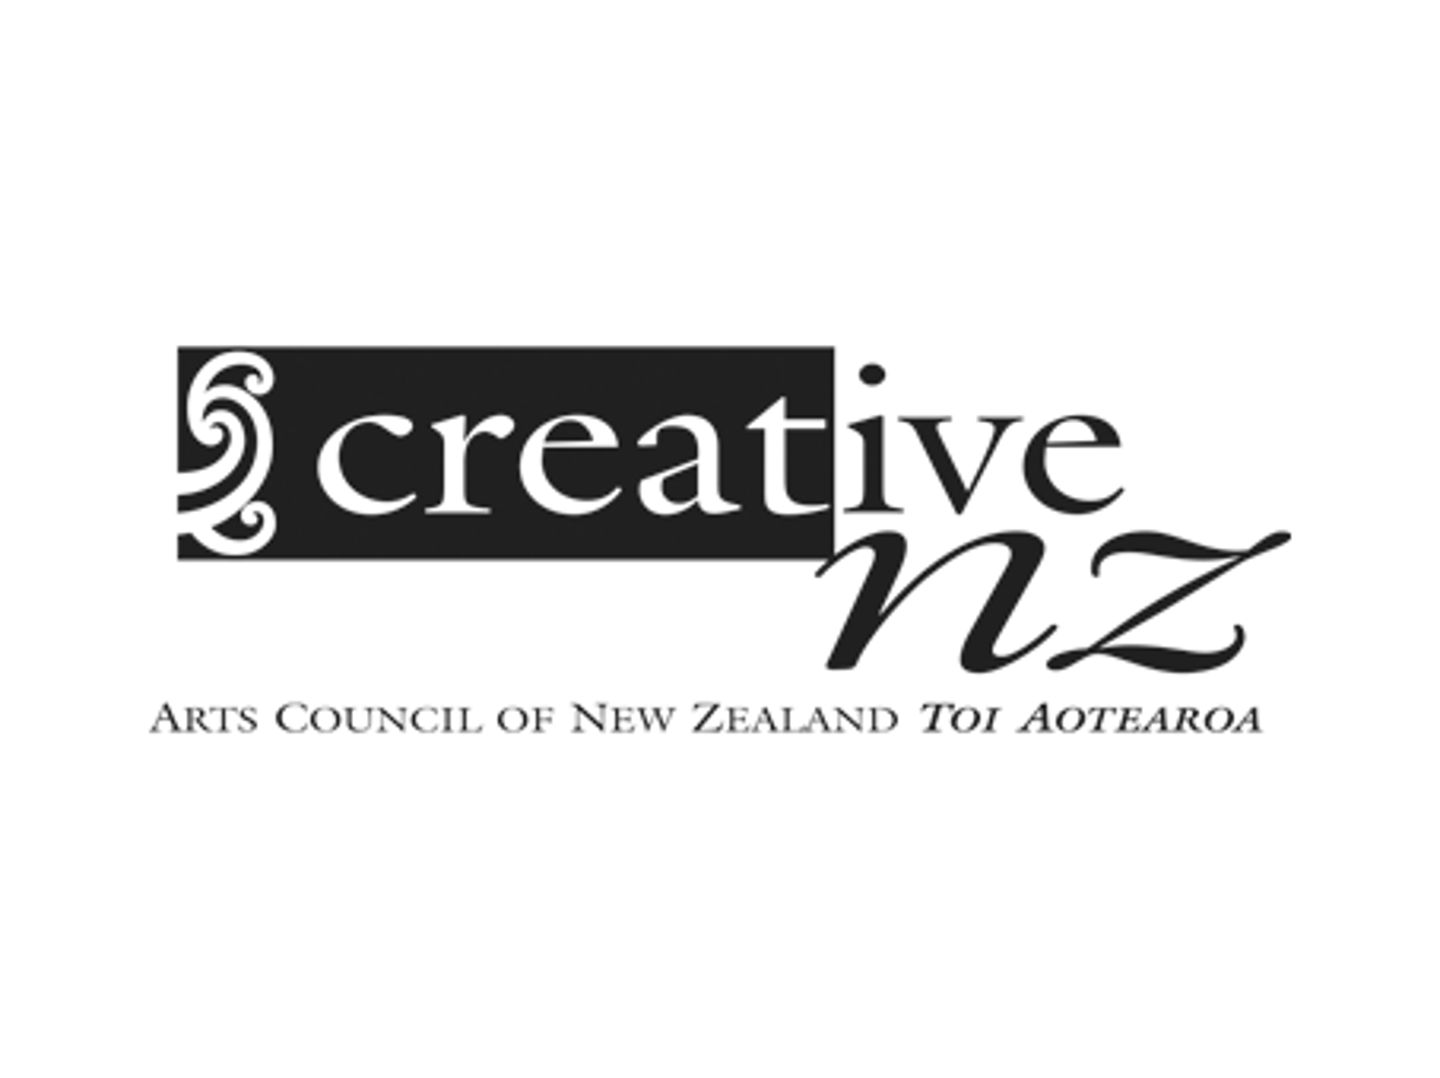 A black and white image of the Creative New Zealand logo.